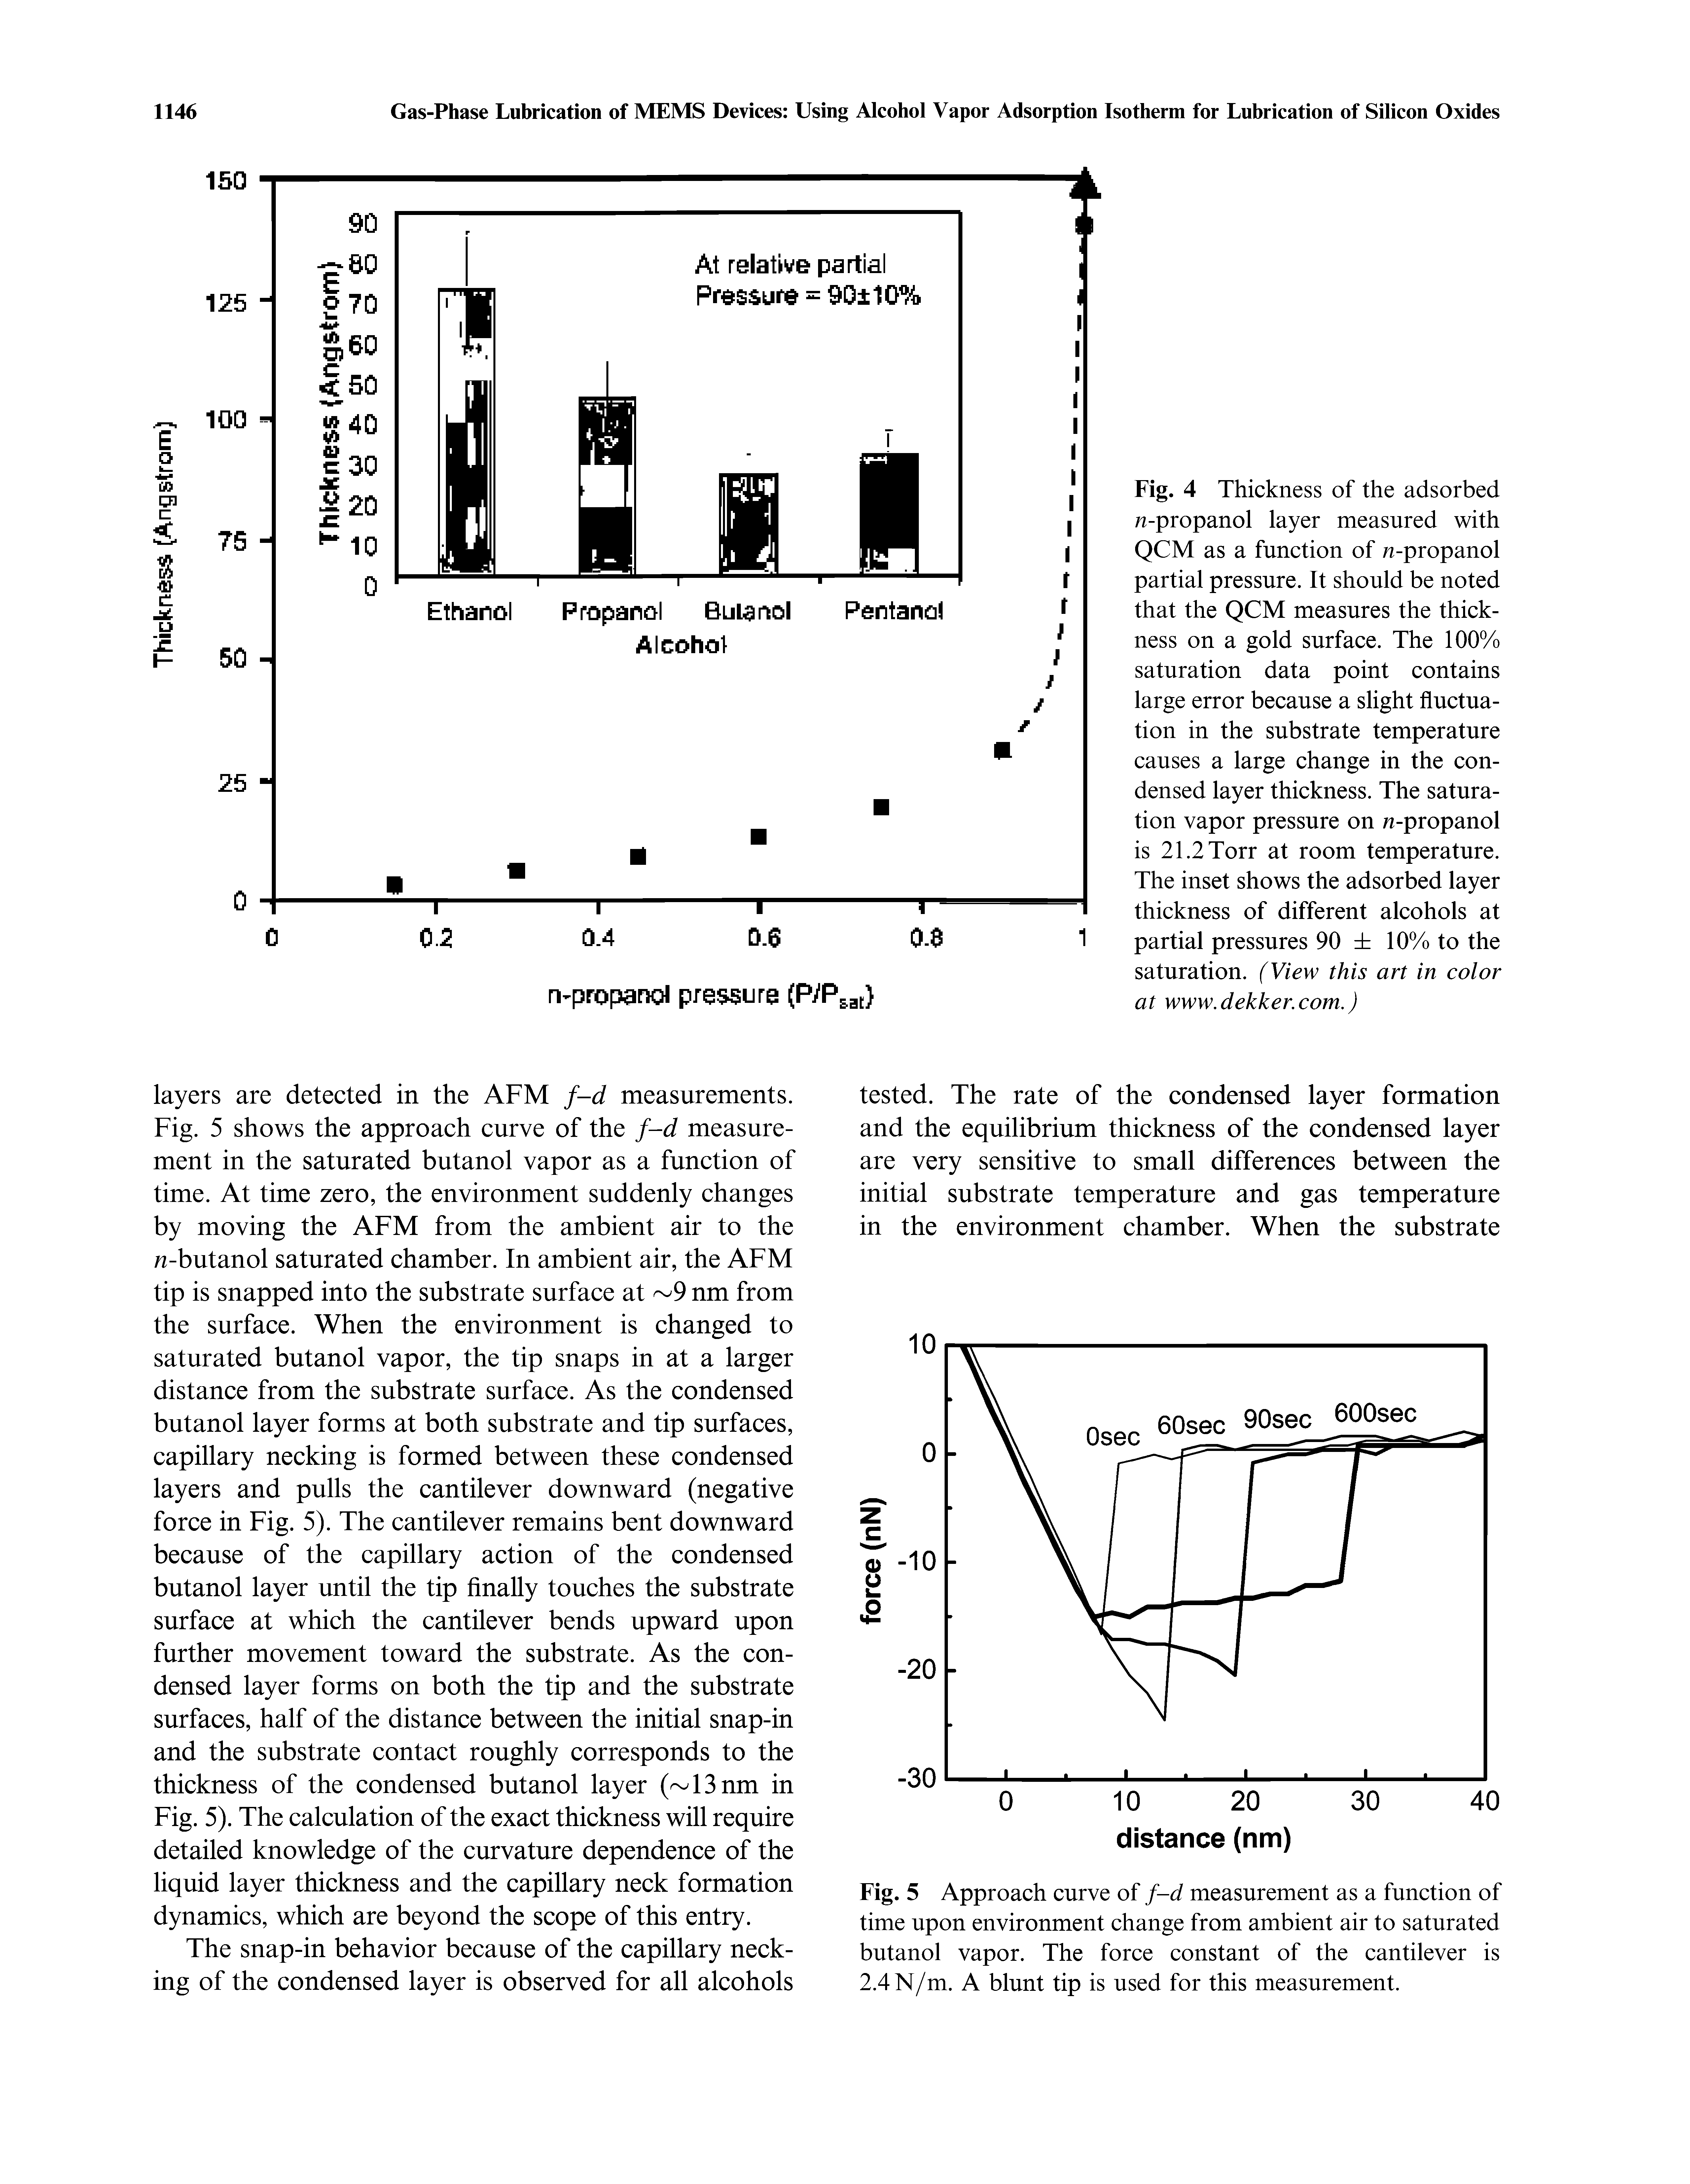 Fig. 4 Thickness of the adsorbed /i-propanol layer measured with QCM as a function of n-propanol partial pressure. It should be noted that the QCM measures the thickness on a gold surface. The 100% saturation data point contains large error because a slight fluctuation in the substrate temperature causes a large change in the condensed layer thickness. The saturation vapor pressure on n-propanol is 21.2 Torr at room temperature. The inset shows the adsorbed layer thickness of different alcohols at partial pressures 90 10% to the saturation. (View this art in color at www.dekker.com.)...